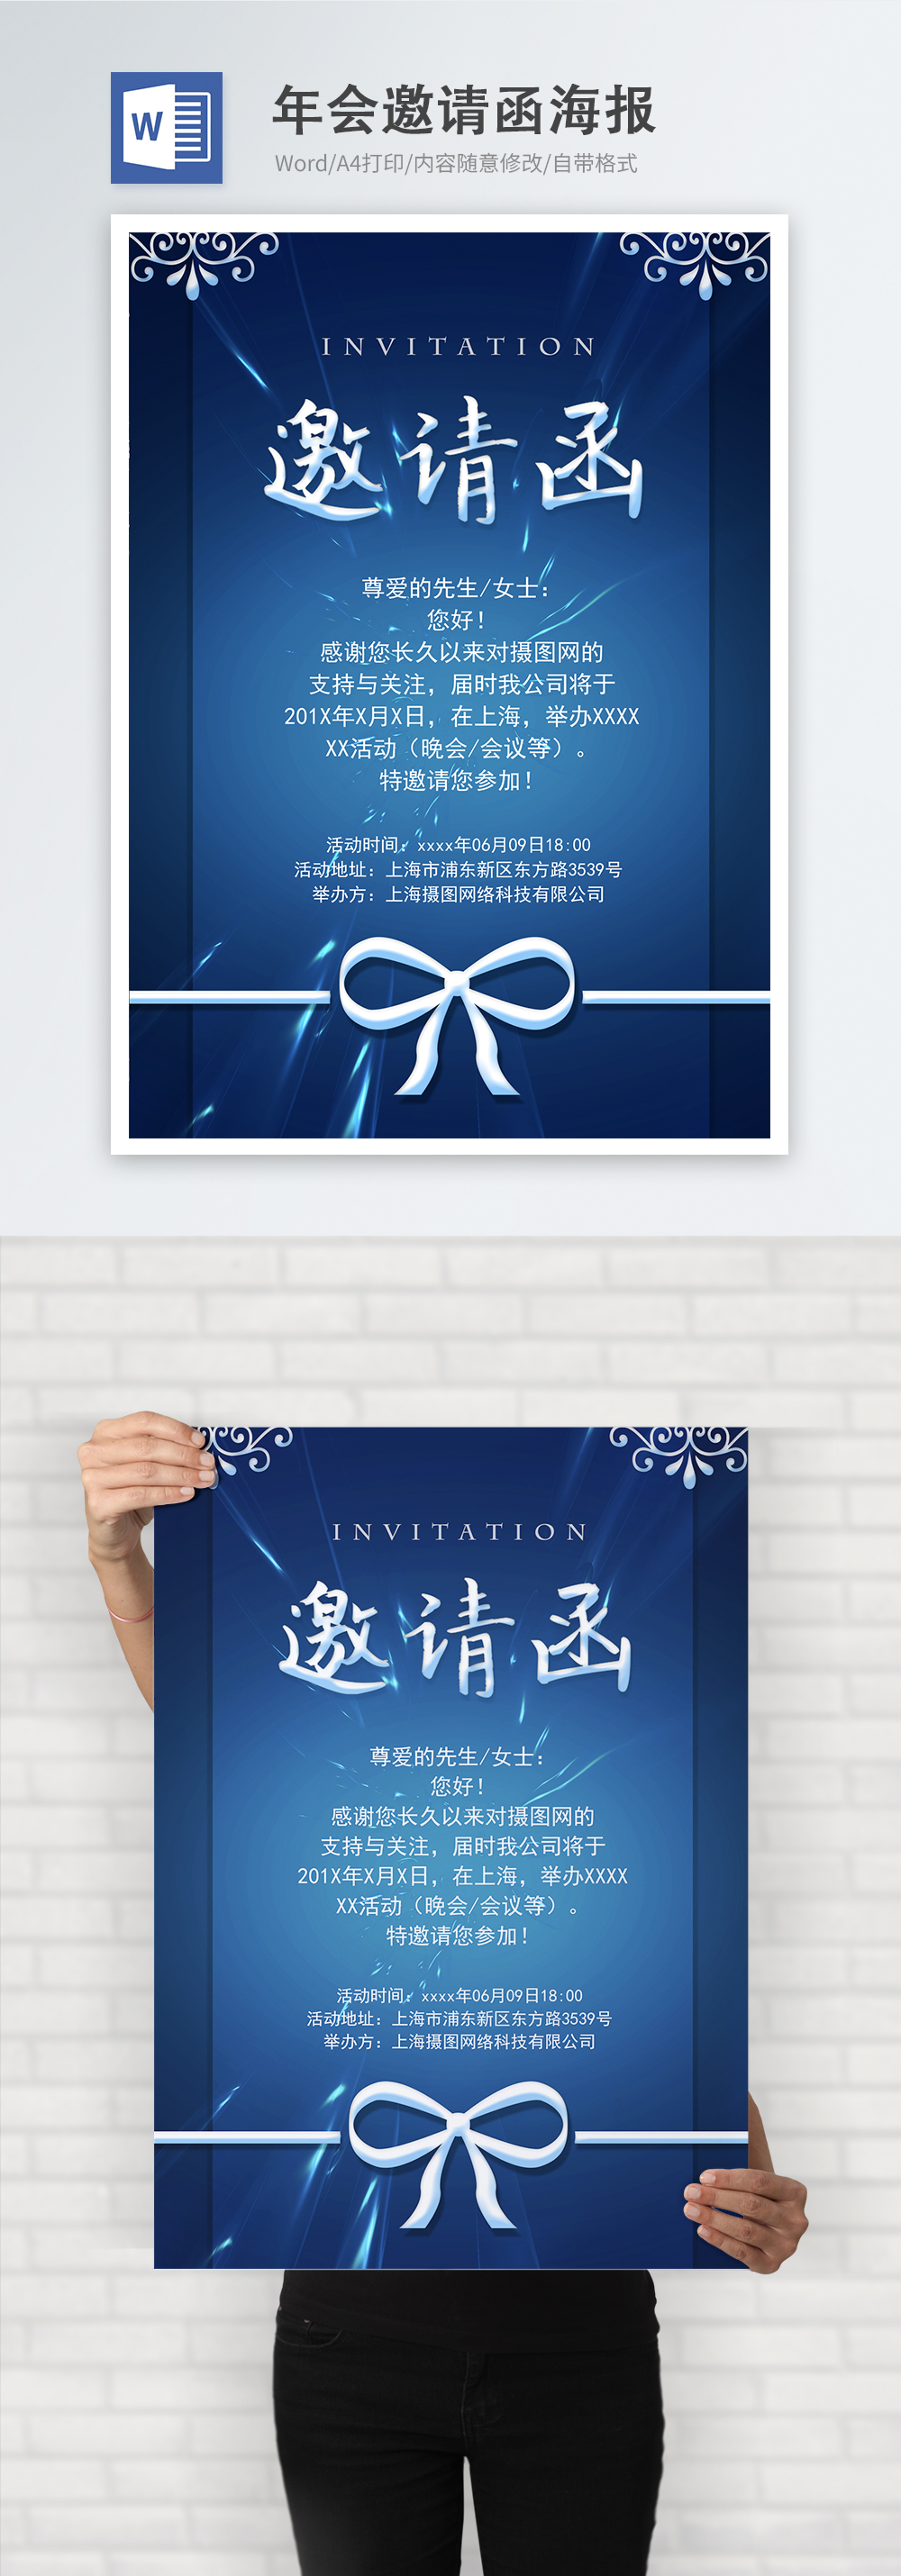 blue-technology-invitation-word-poster-word-template-word-free-download